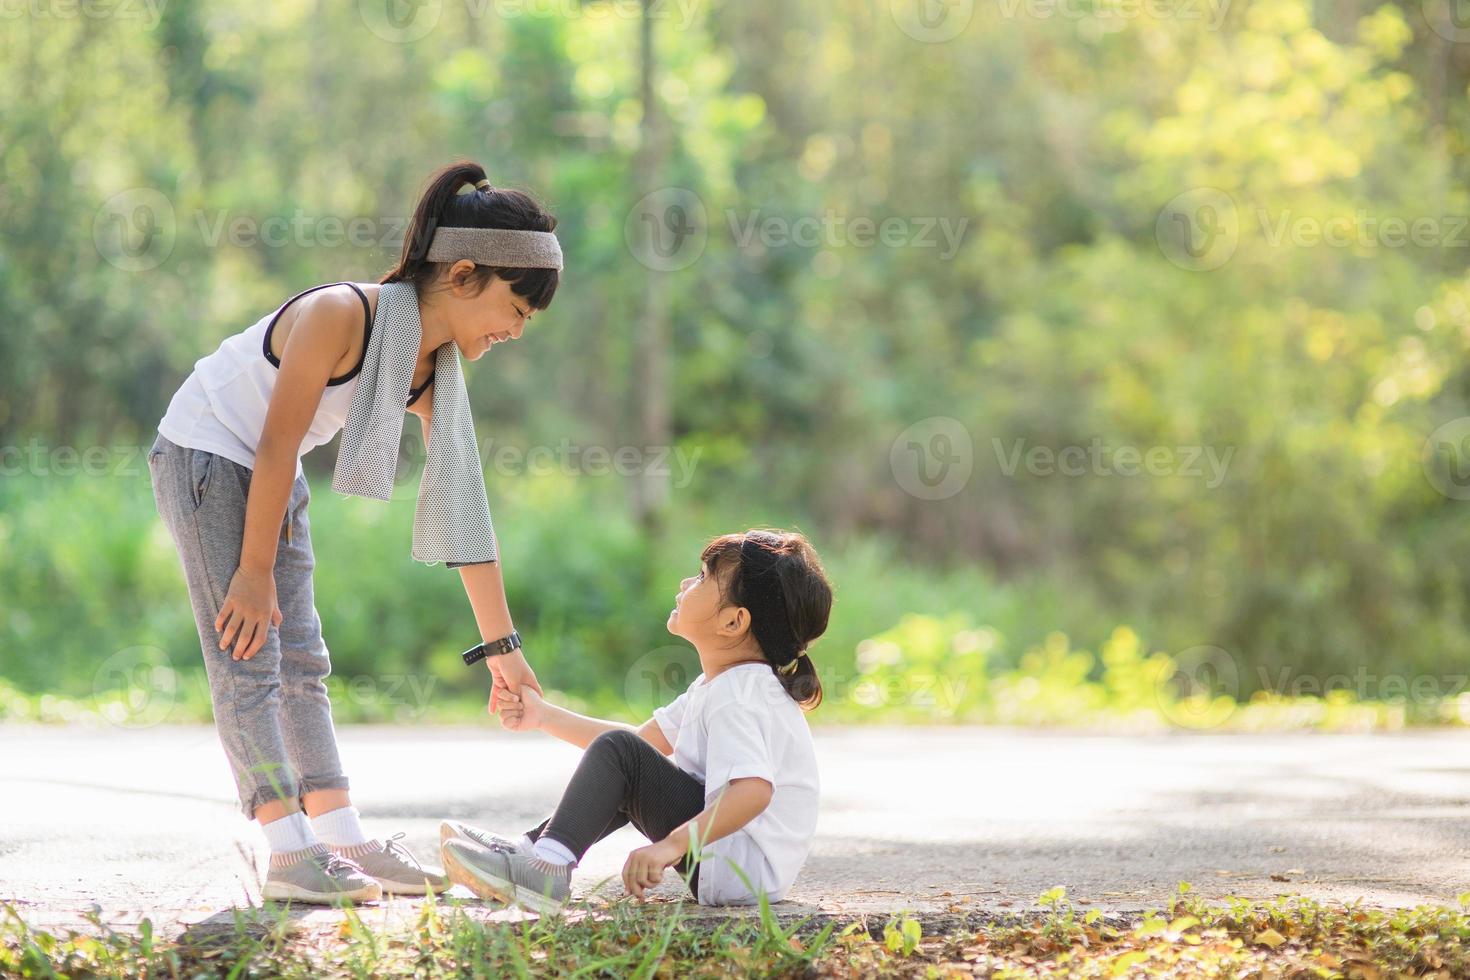 Cute asian girl give hand to help sister accident during running photo